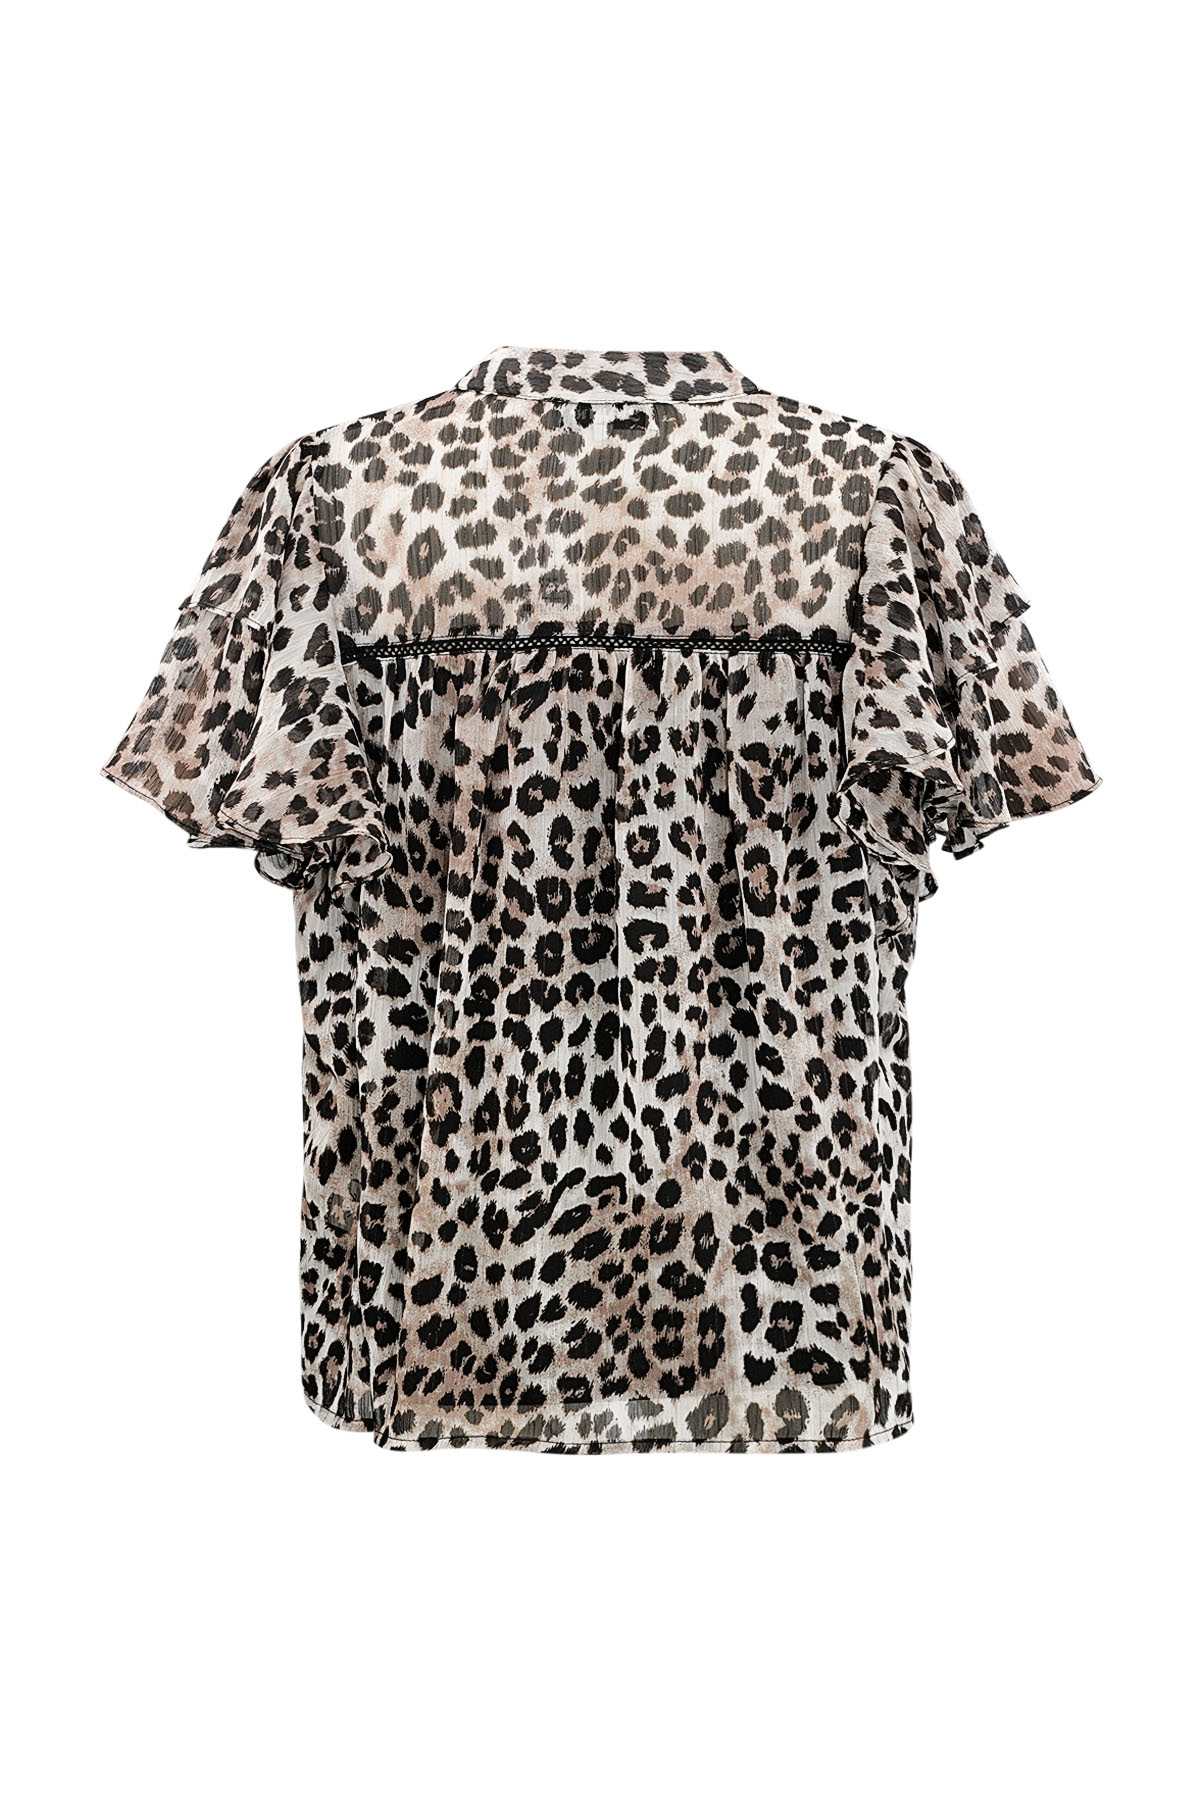 Leopard print top flare sleeves - brown Picture6